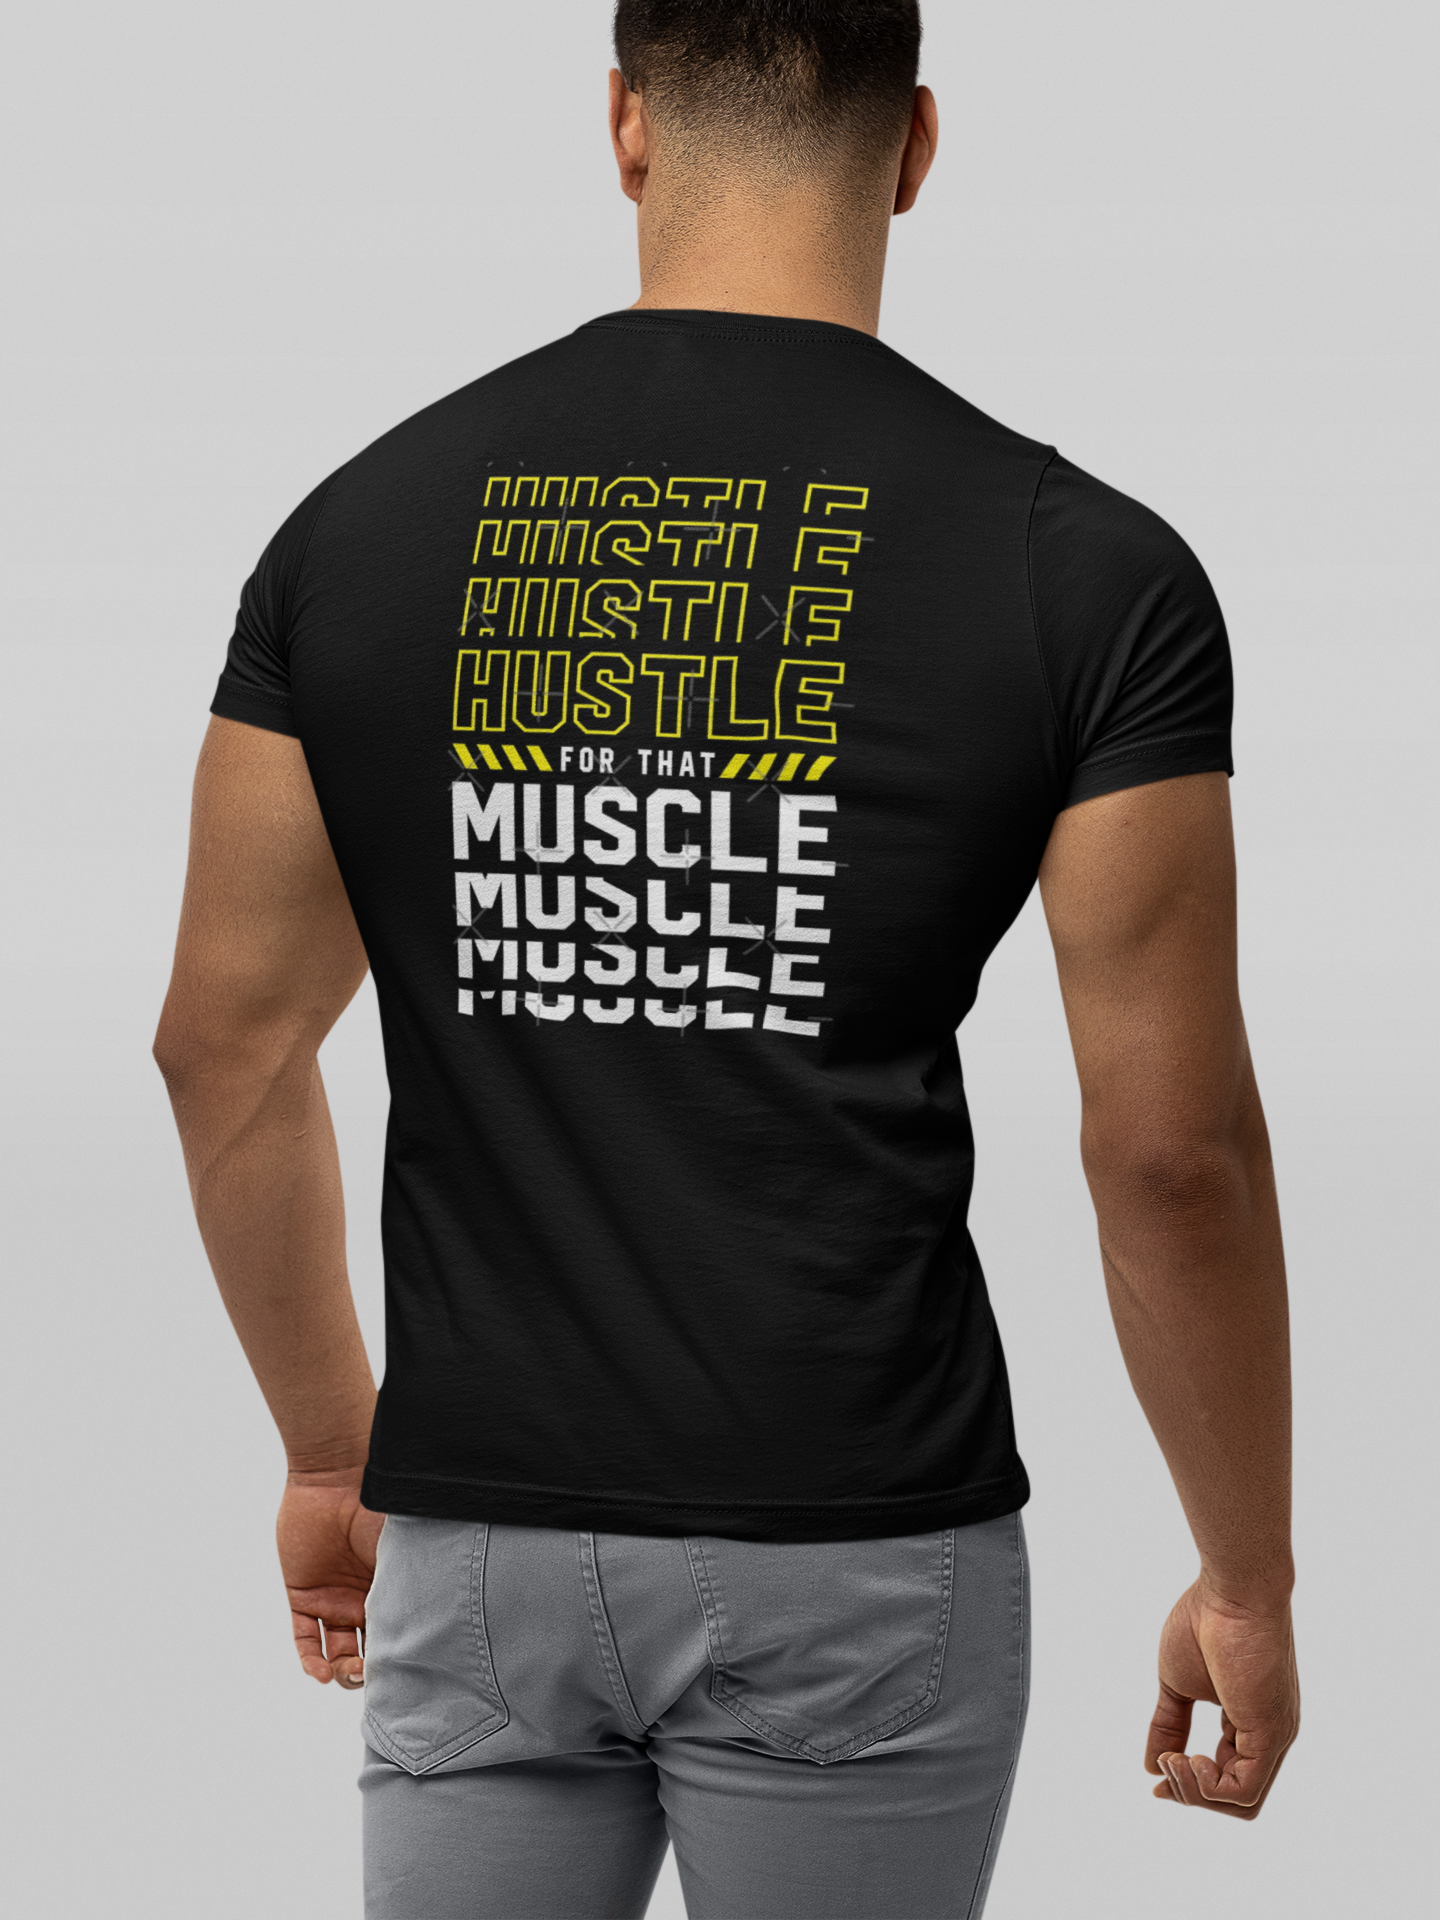 Hustle for that Muscle - Gym T Shirt Strong Soul Shirts & Tops